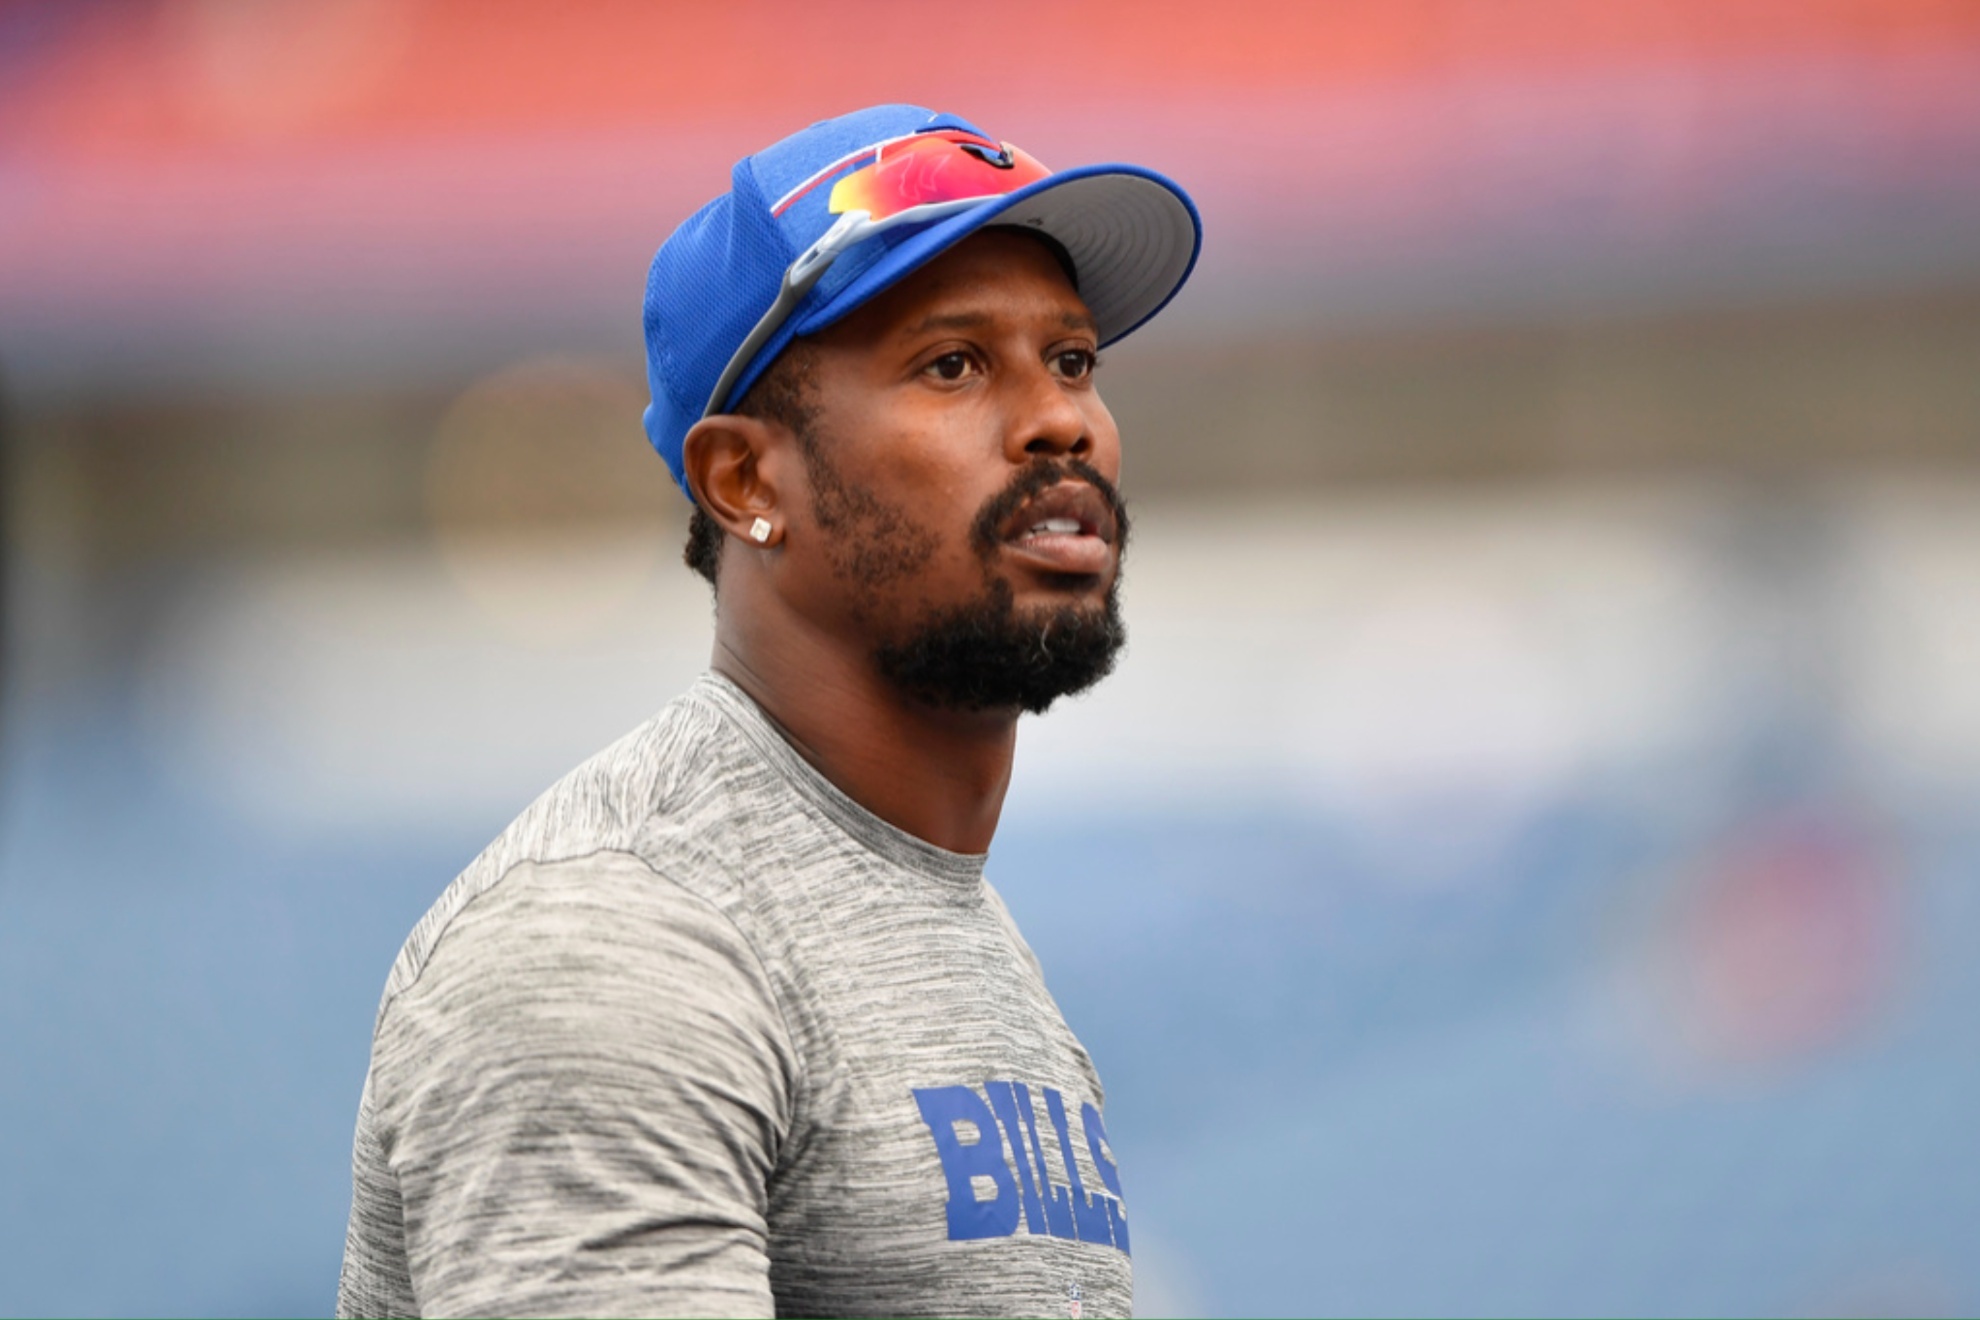 Buffalo Bills linebacker, Von Miller, spoke to the media about his domestic abuse allegations